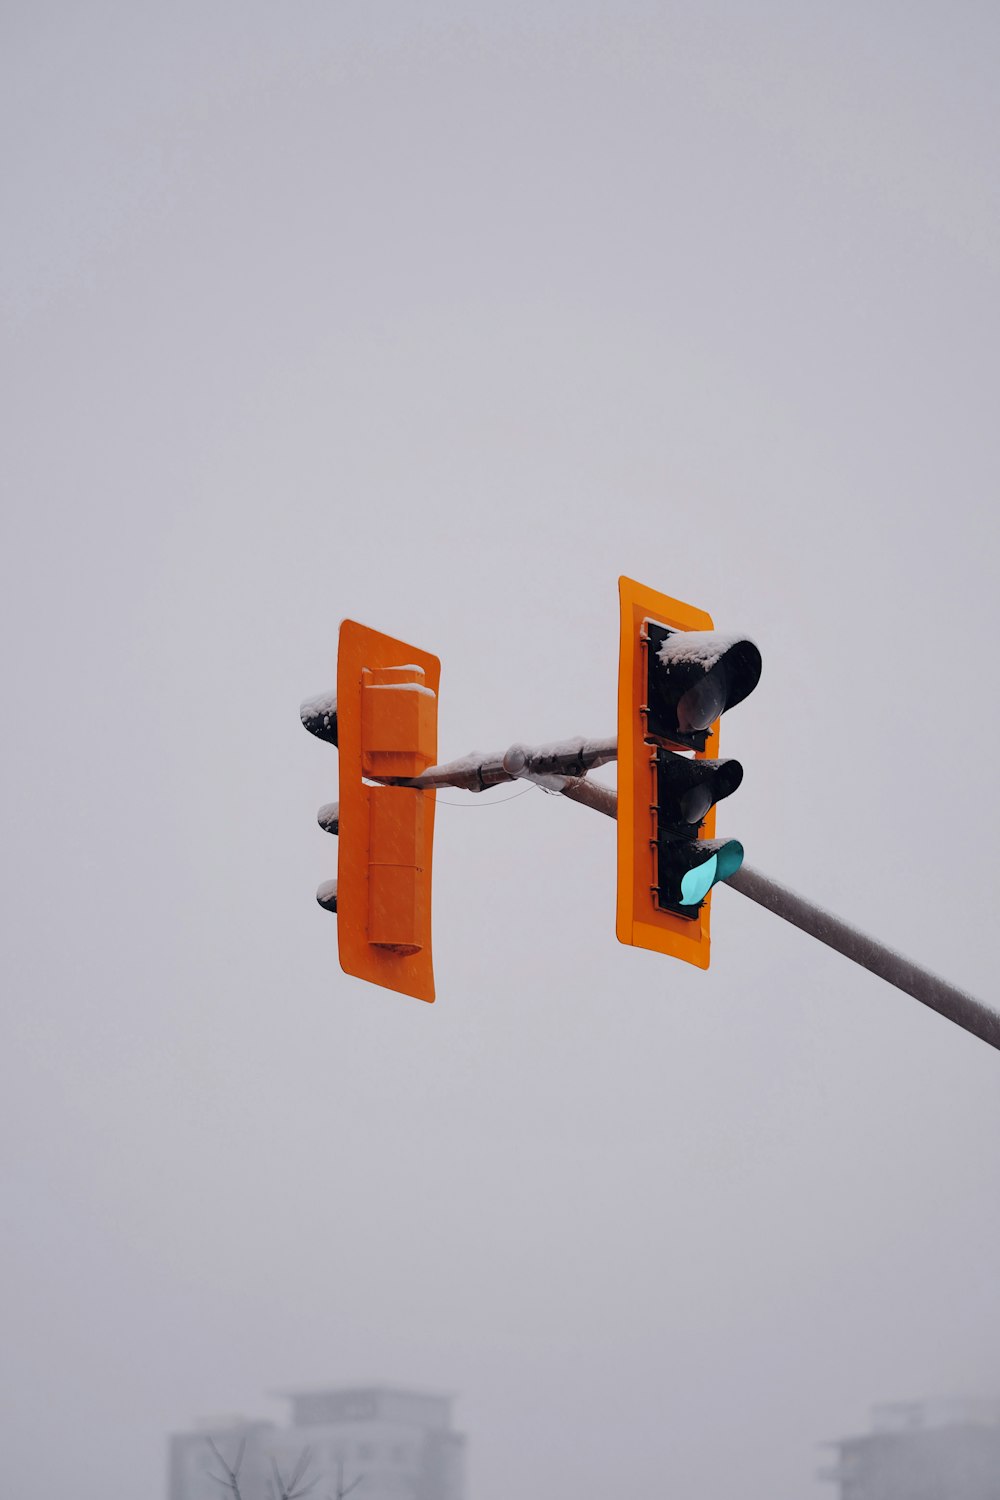 a traffic light hanging from the side of a pole